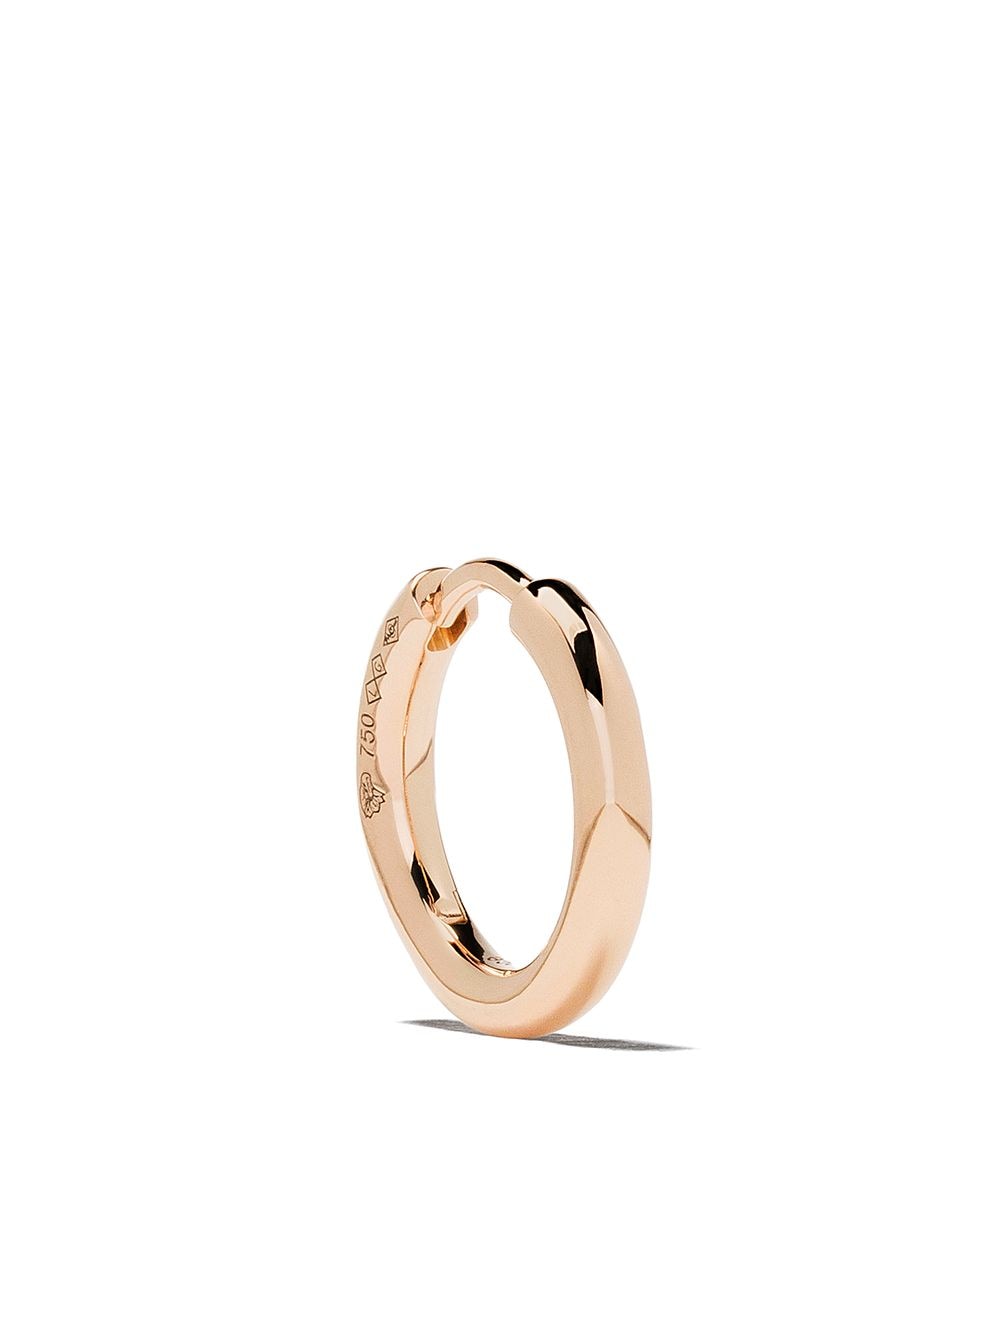 Le Gramme 18kt Polished Red Gold 21/10g Bangle Earring In Rose Gold